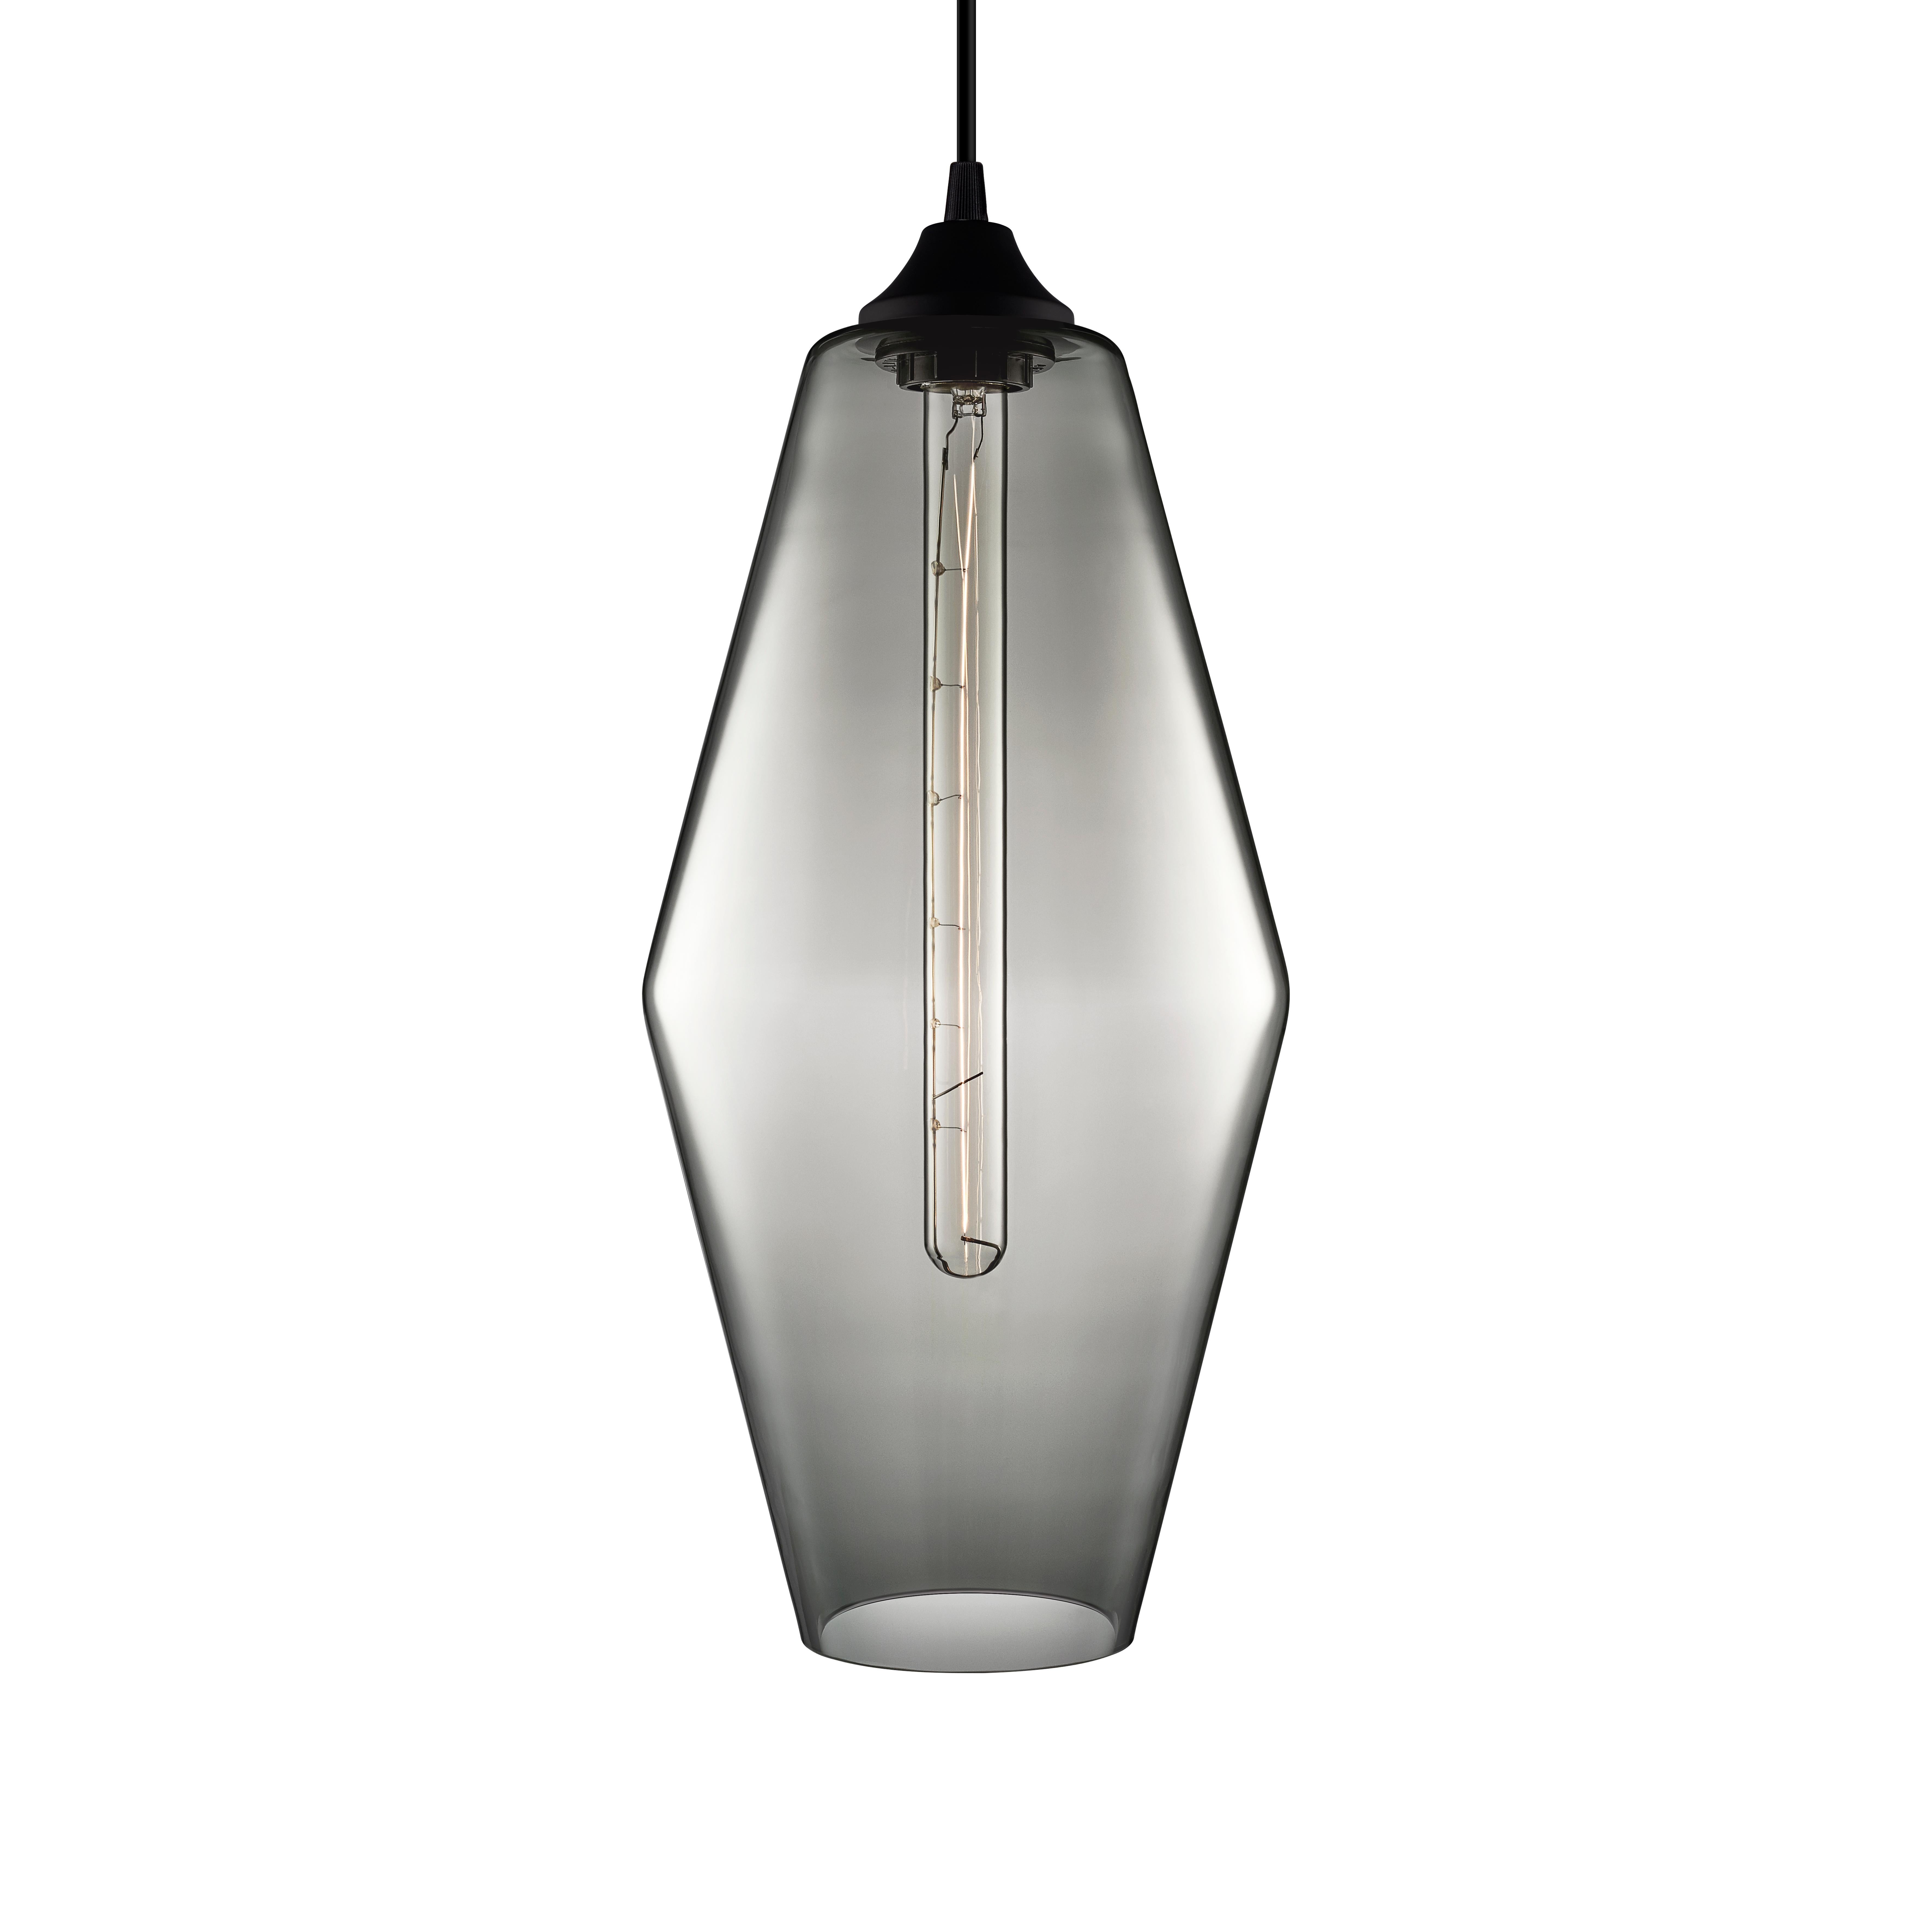 Marquise Grand Gray Handblown Modern Glass Pendant Light, Made in the USA For Sale